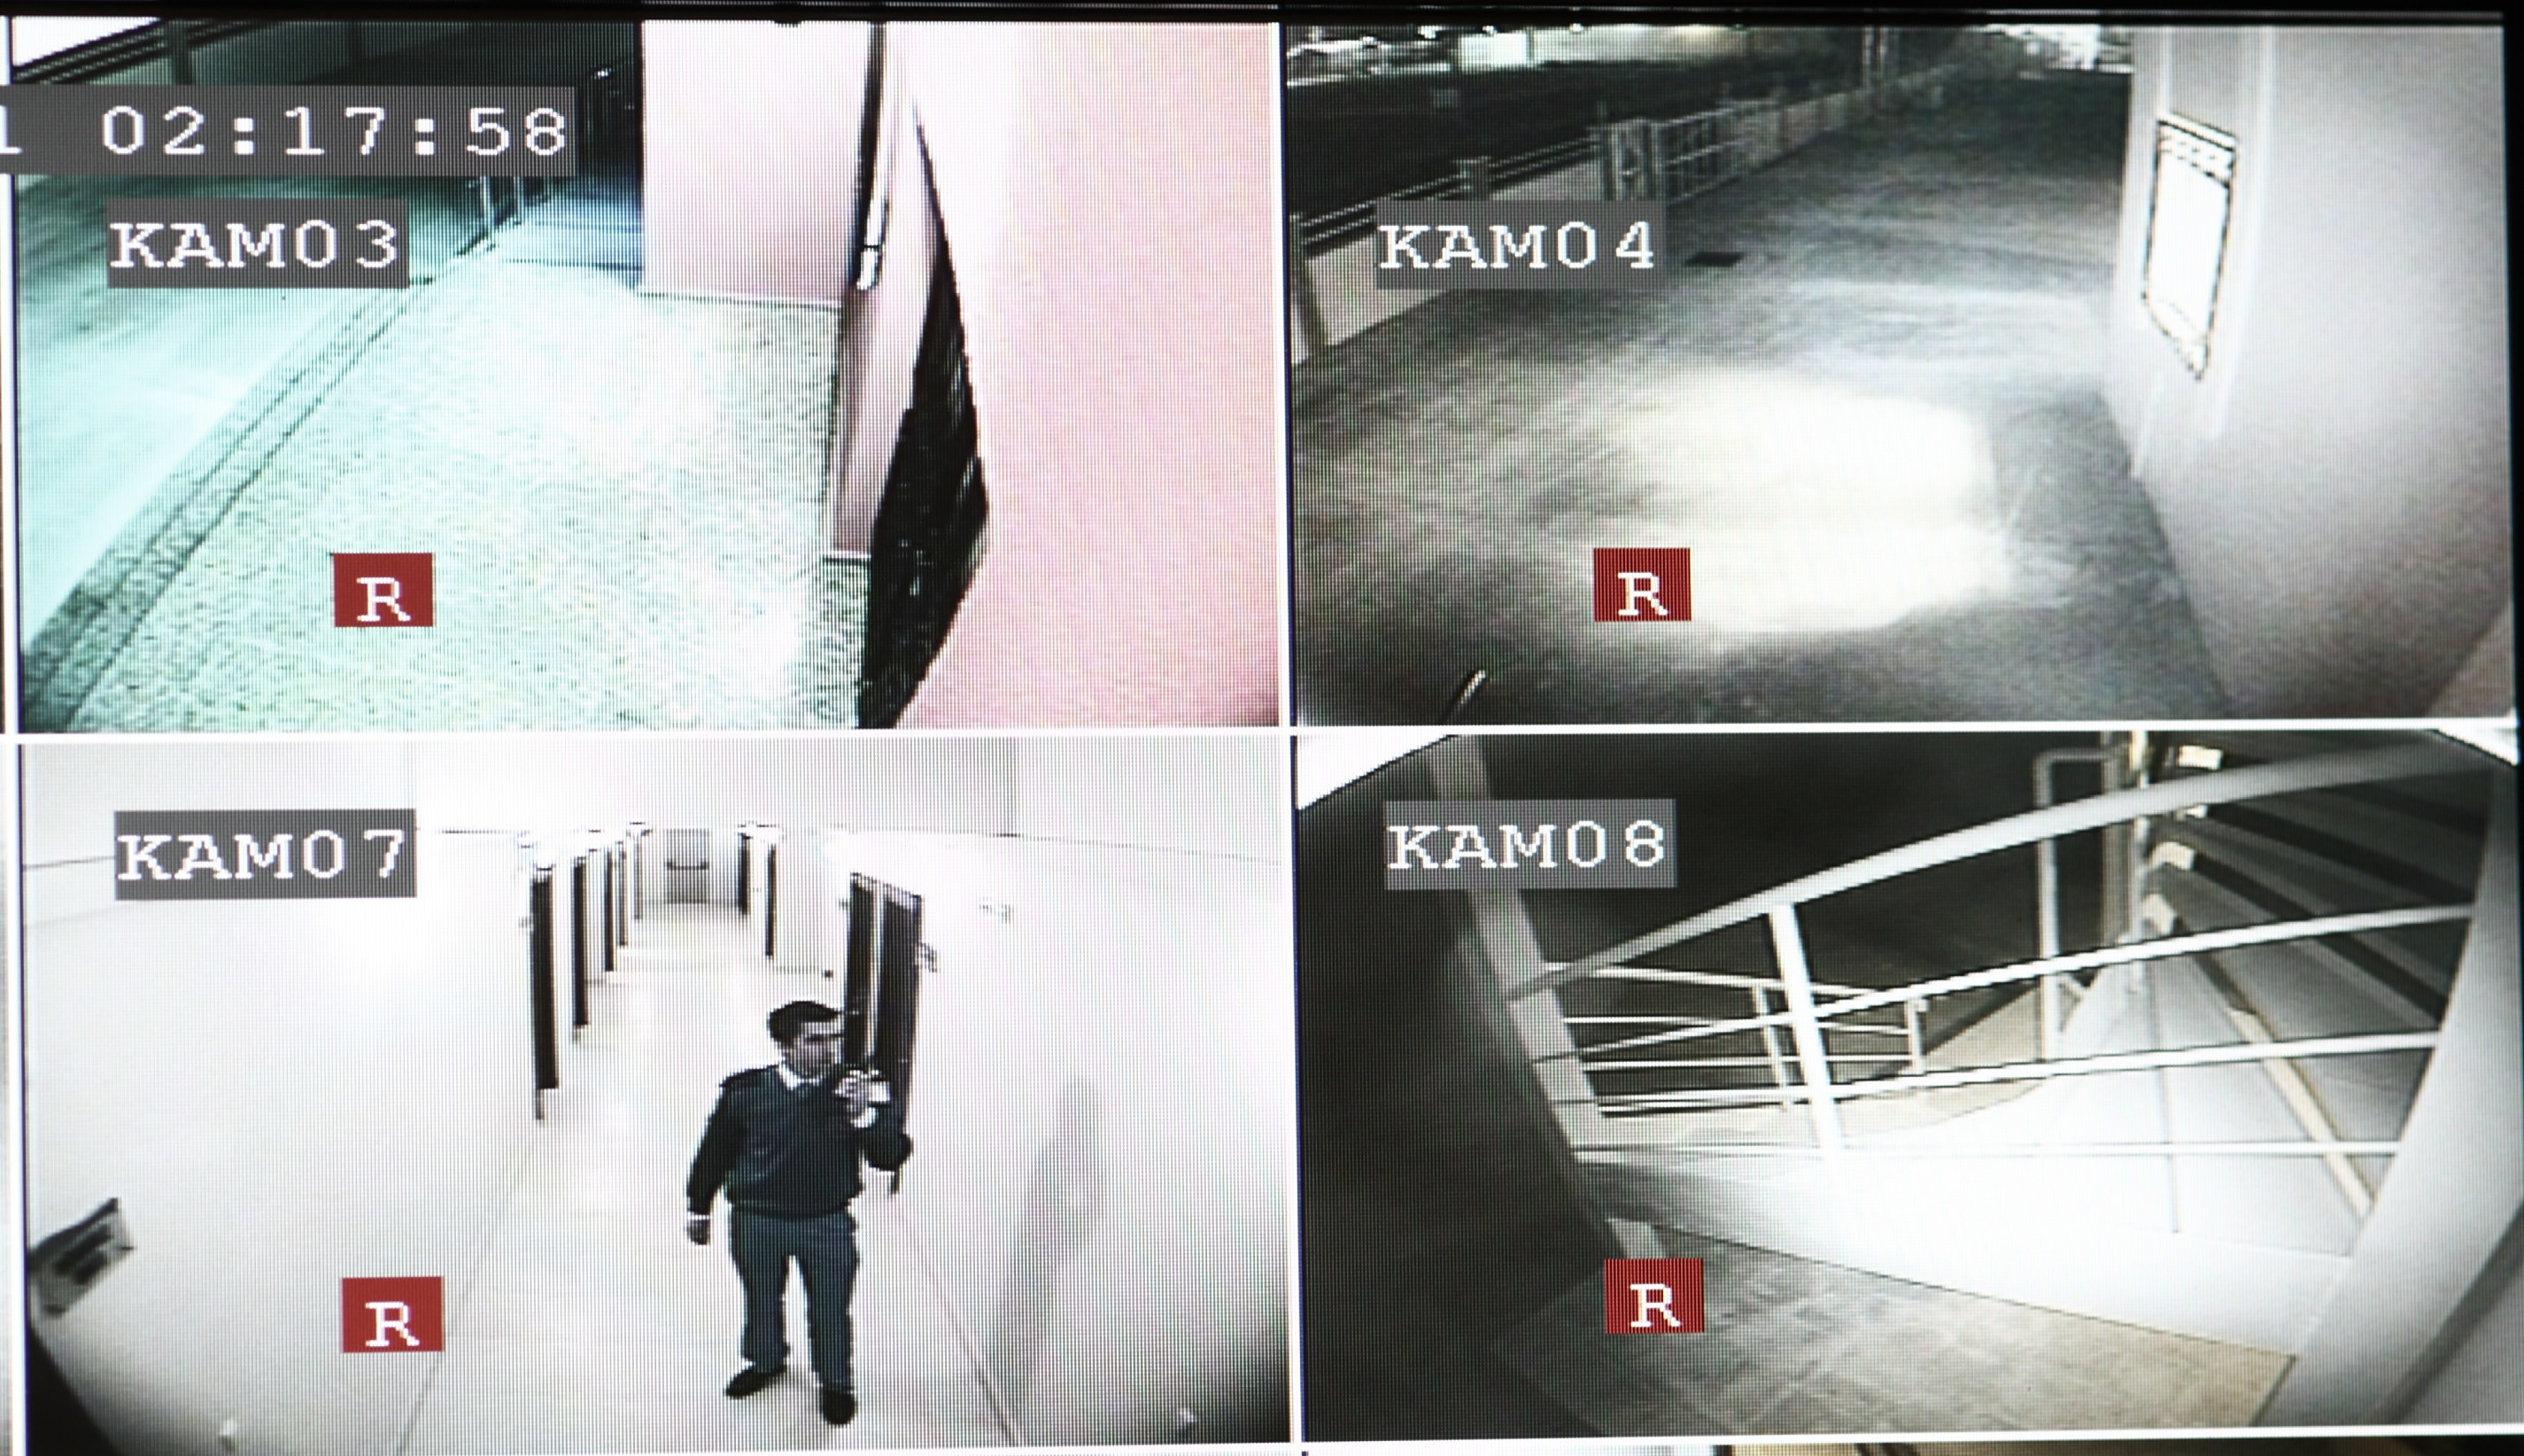 four camera images showing different parking lots